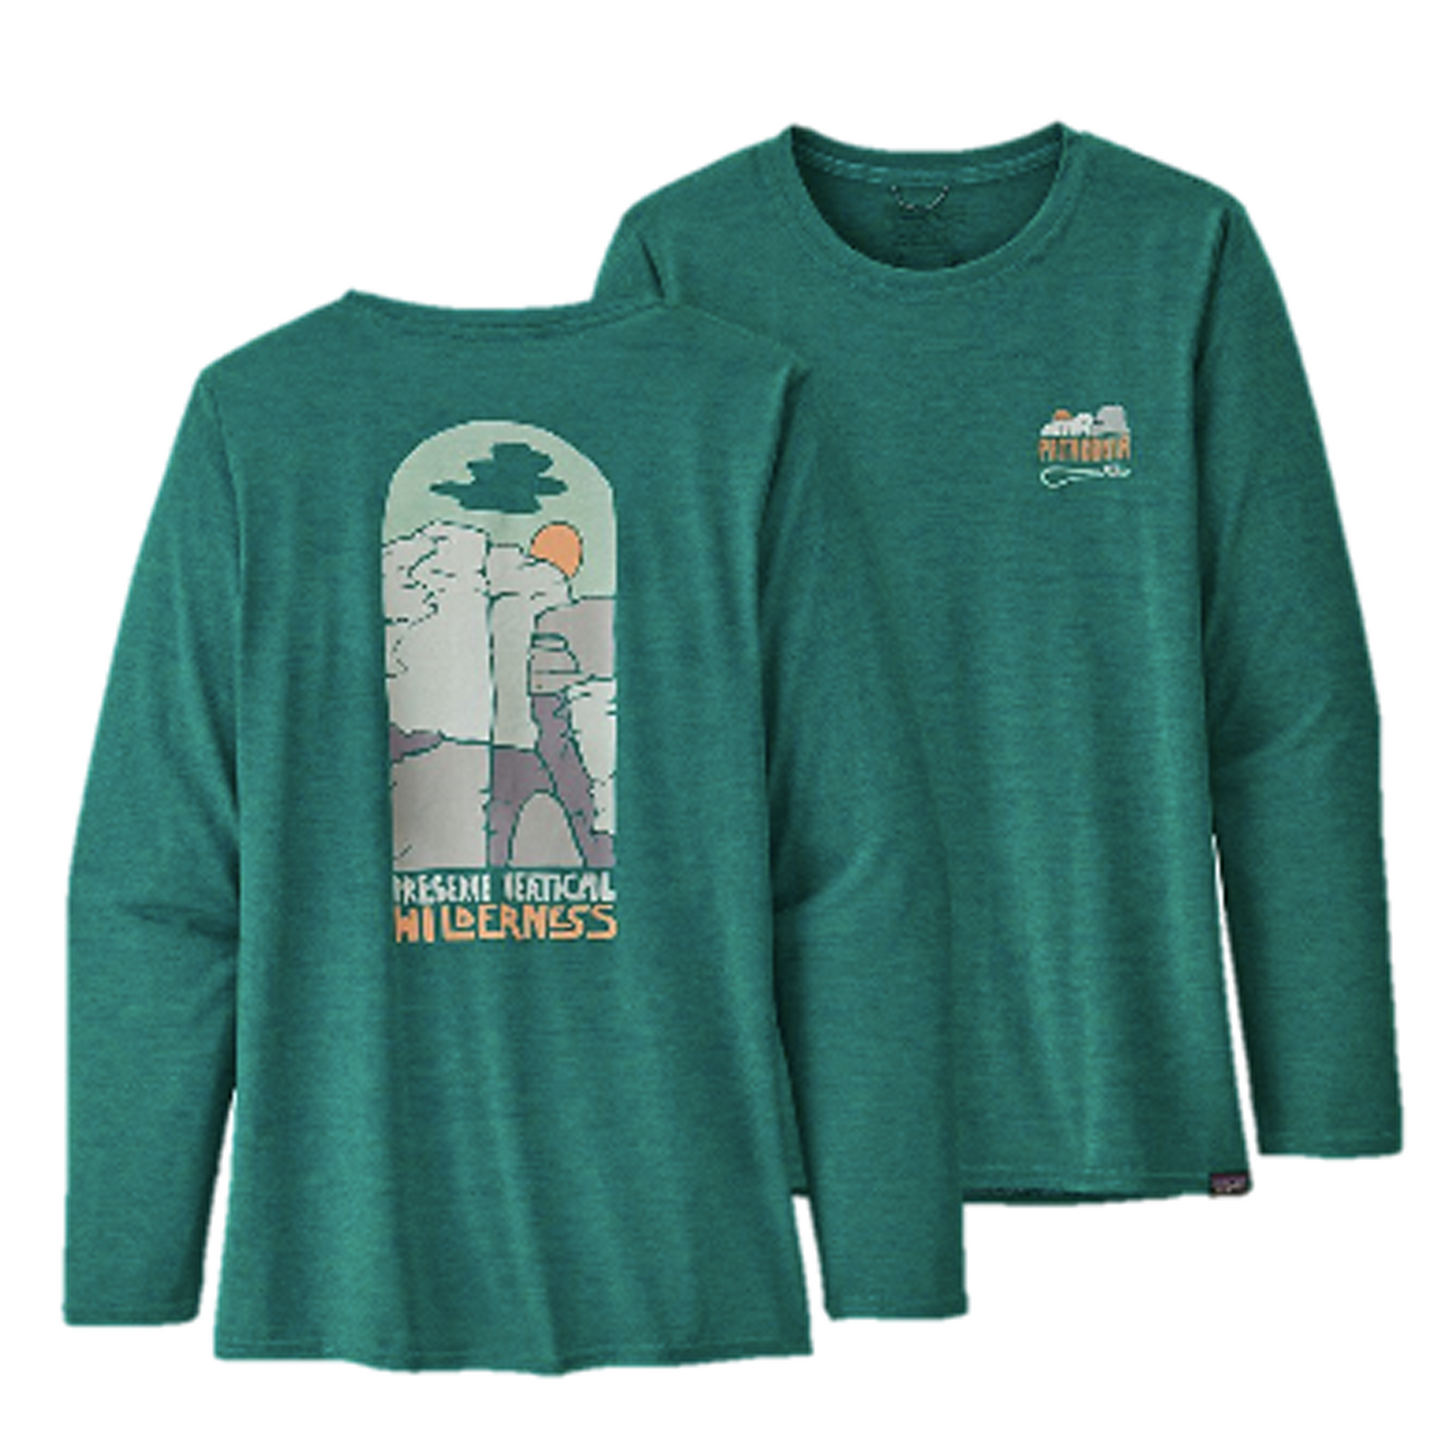 Patagonia Women's cap cool daily graphic long sleeve shirt in the colour sage green with a cliff scene on the back. 